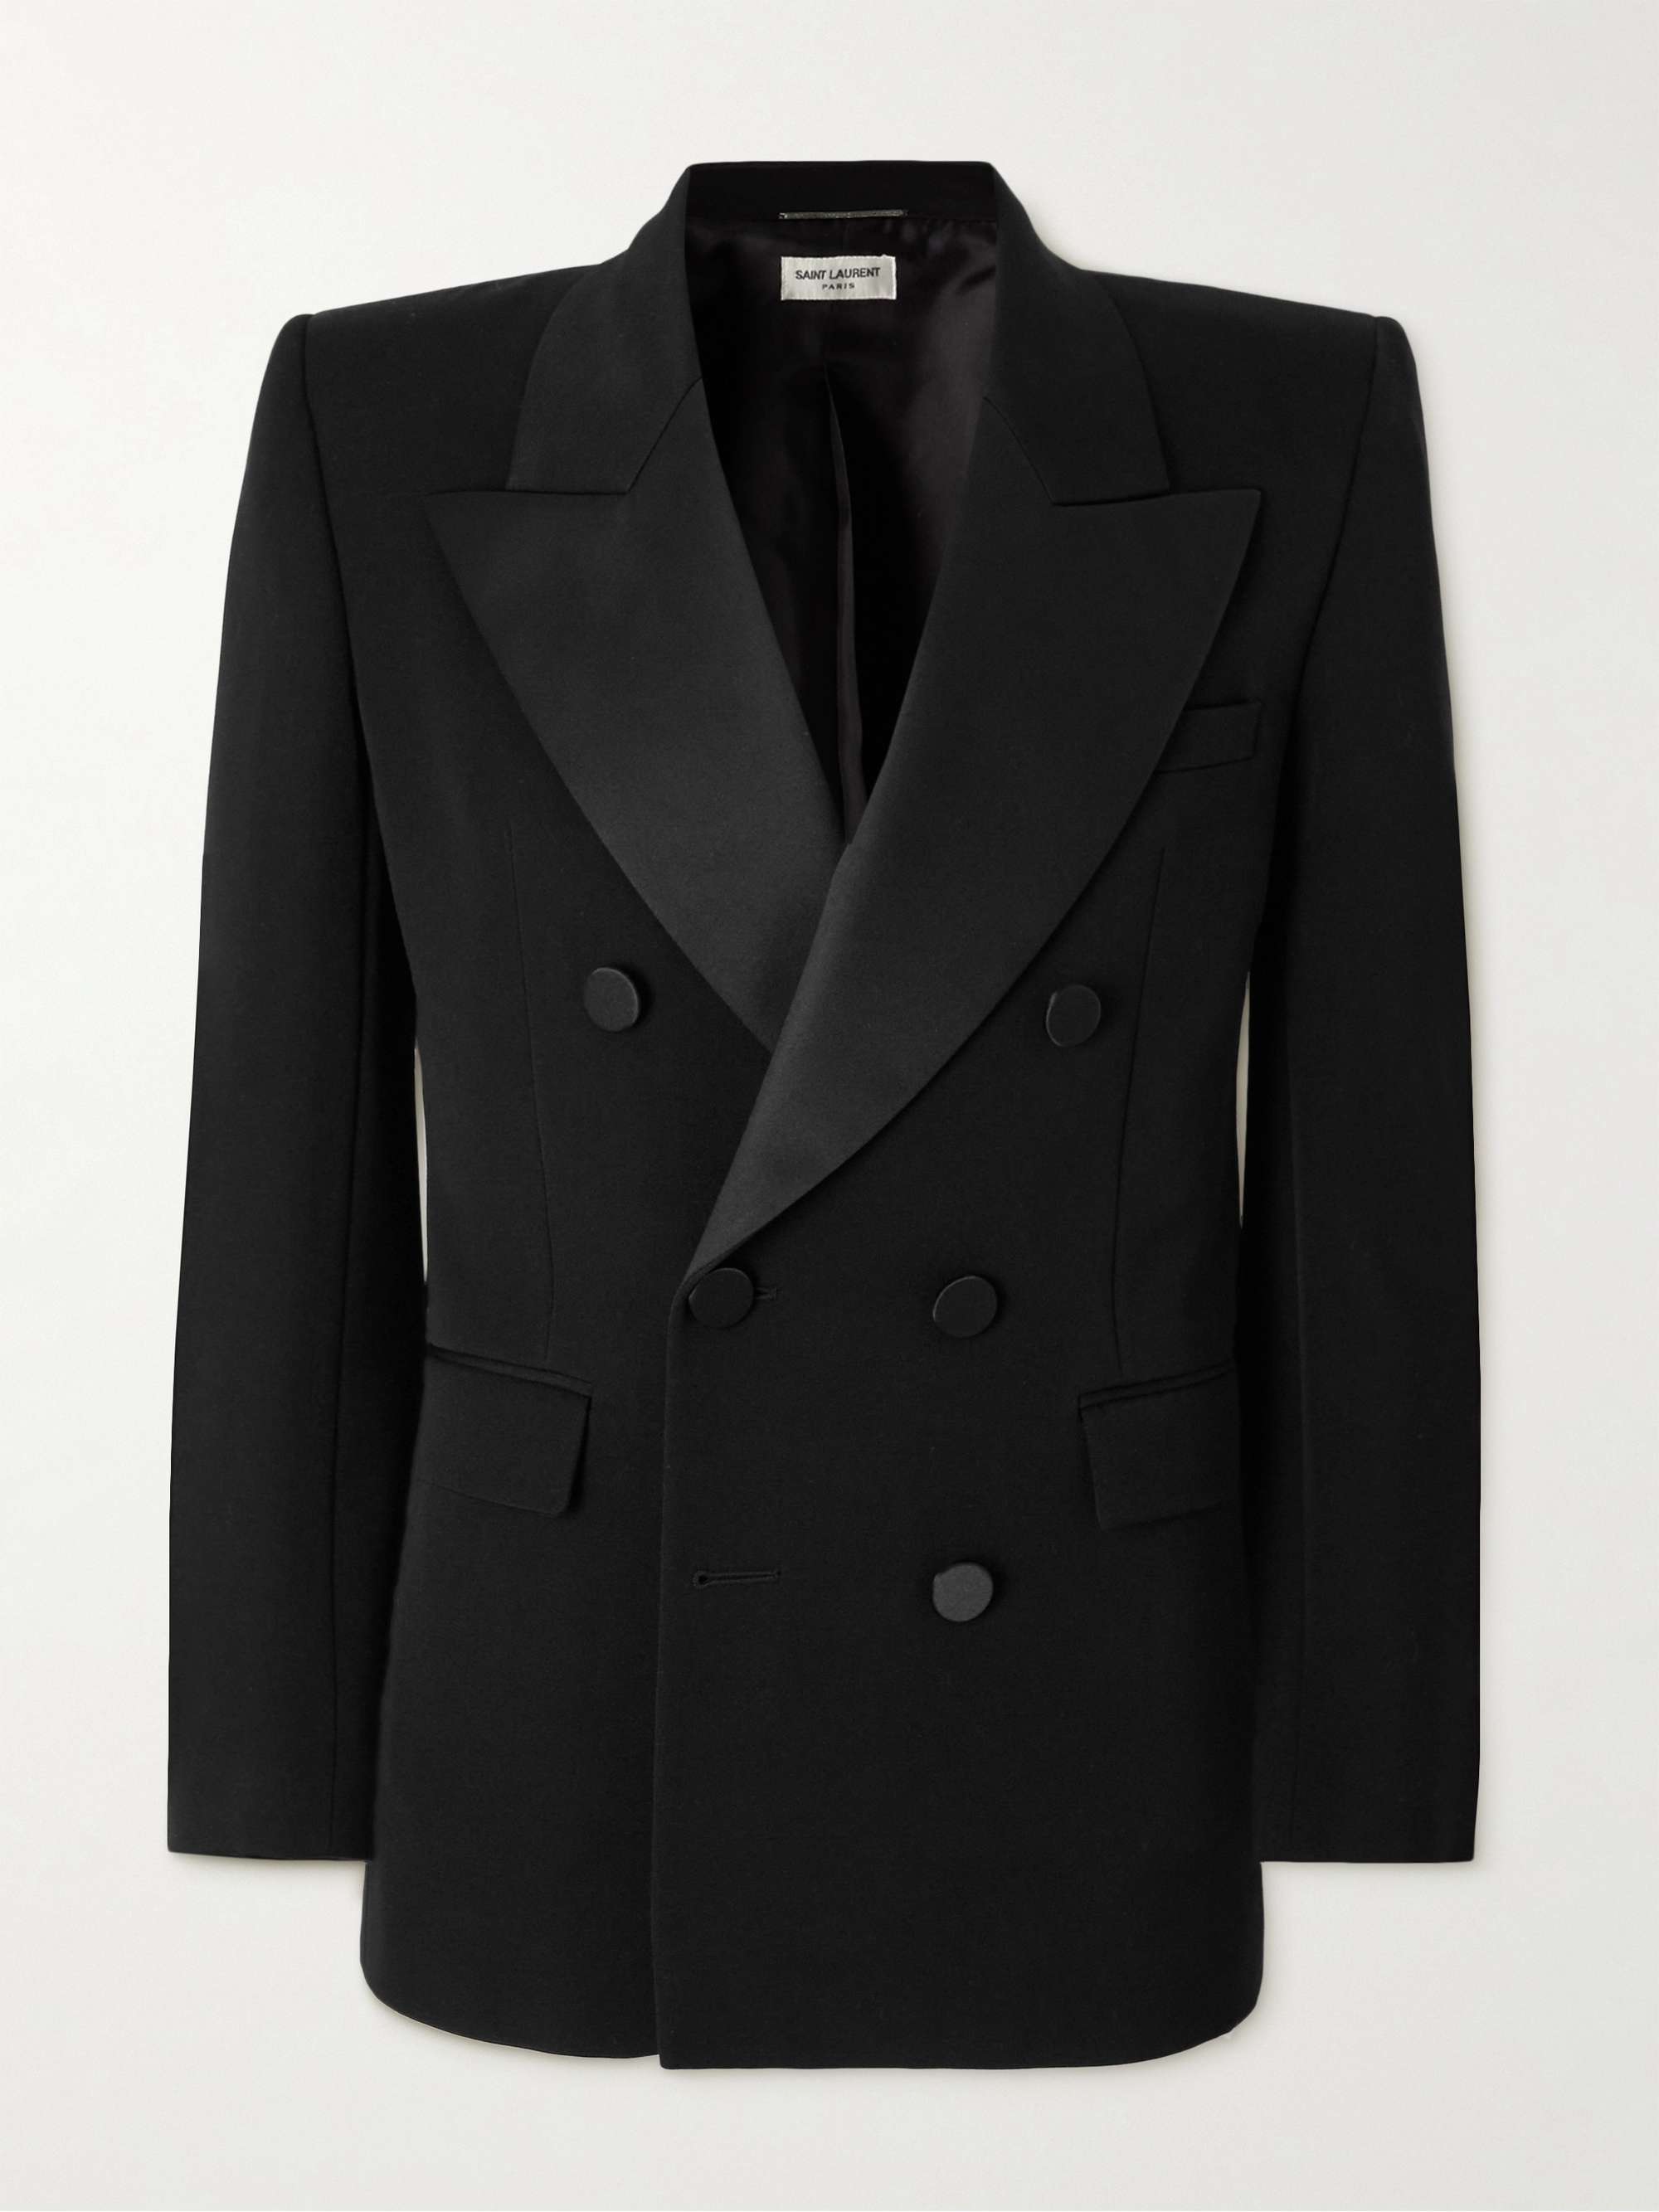 SAINT LAURENT Double-Breasted Satin-Trimmed Wool Blazer